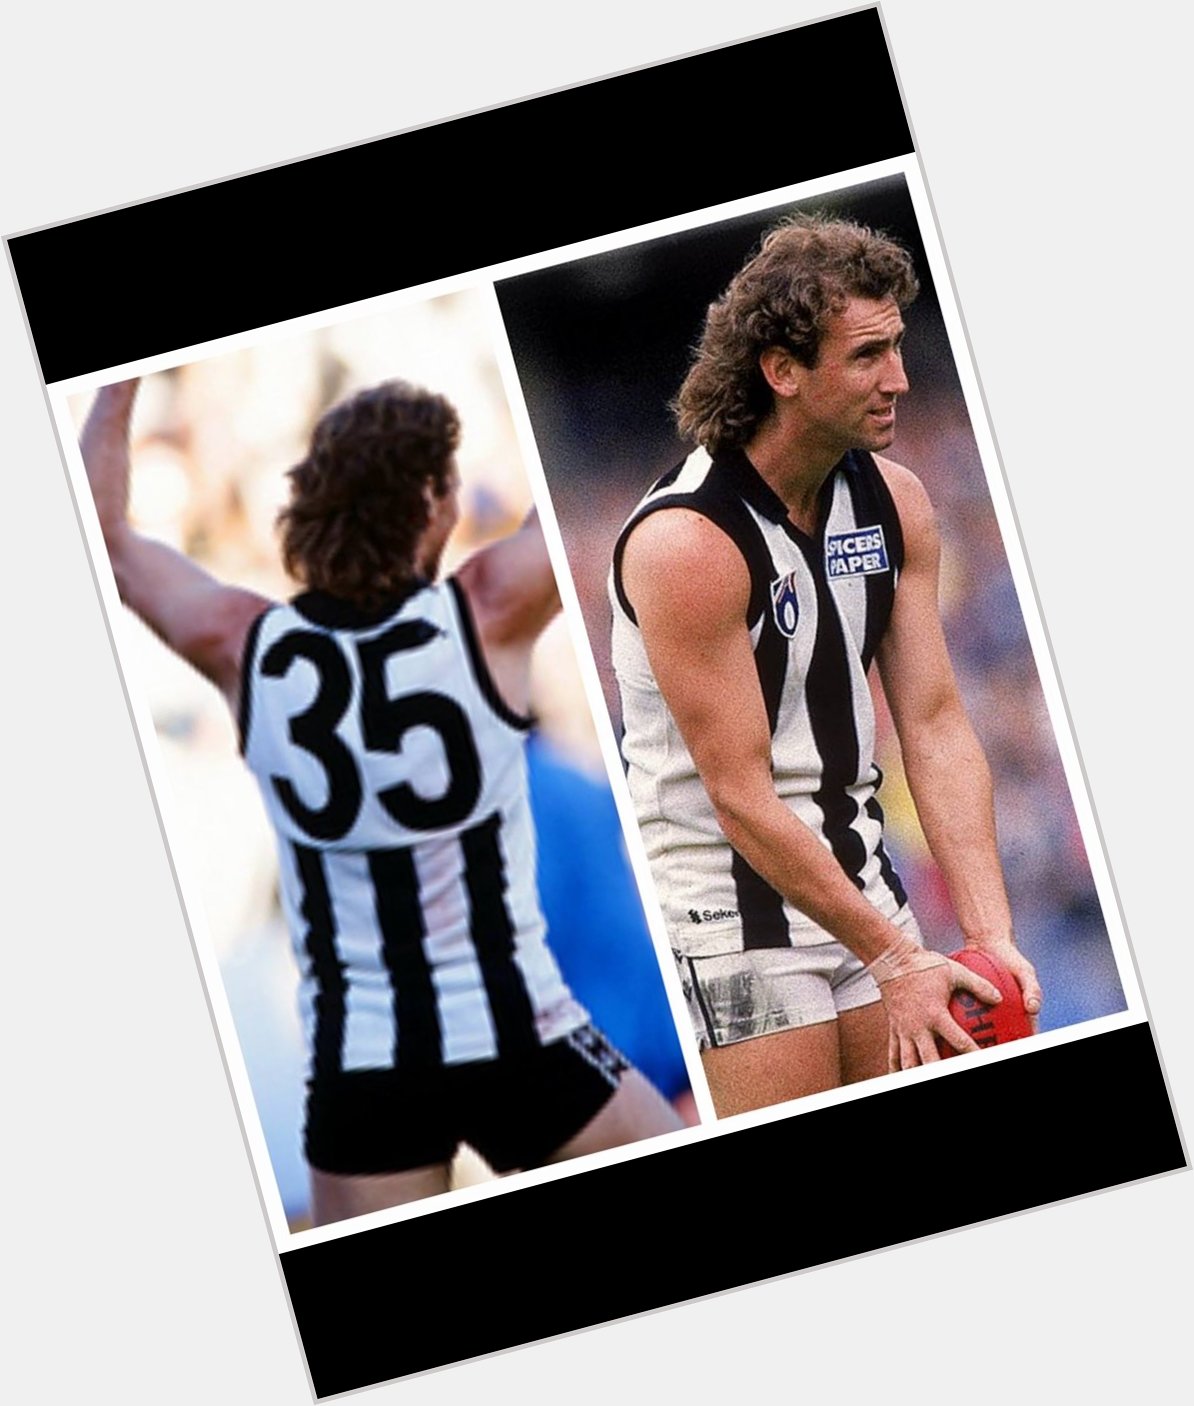 Happy birthday to a legend of The Collingwood football club Peter Daicos 